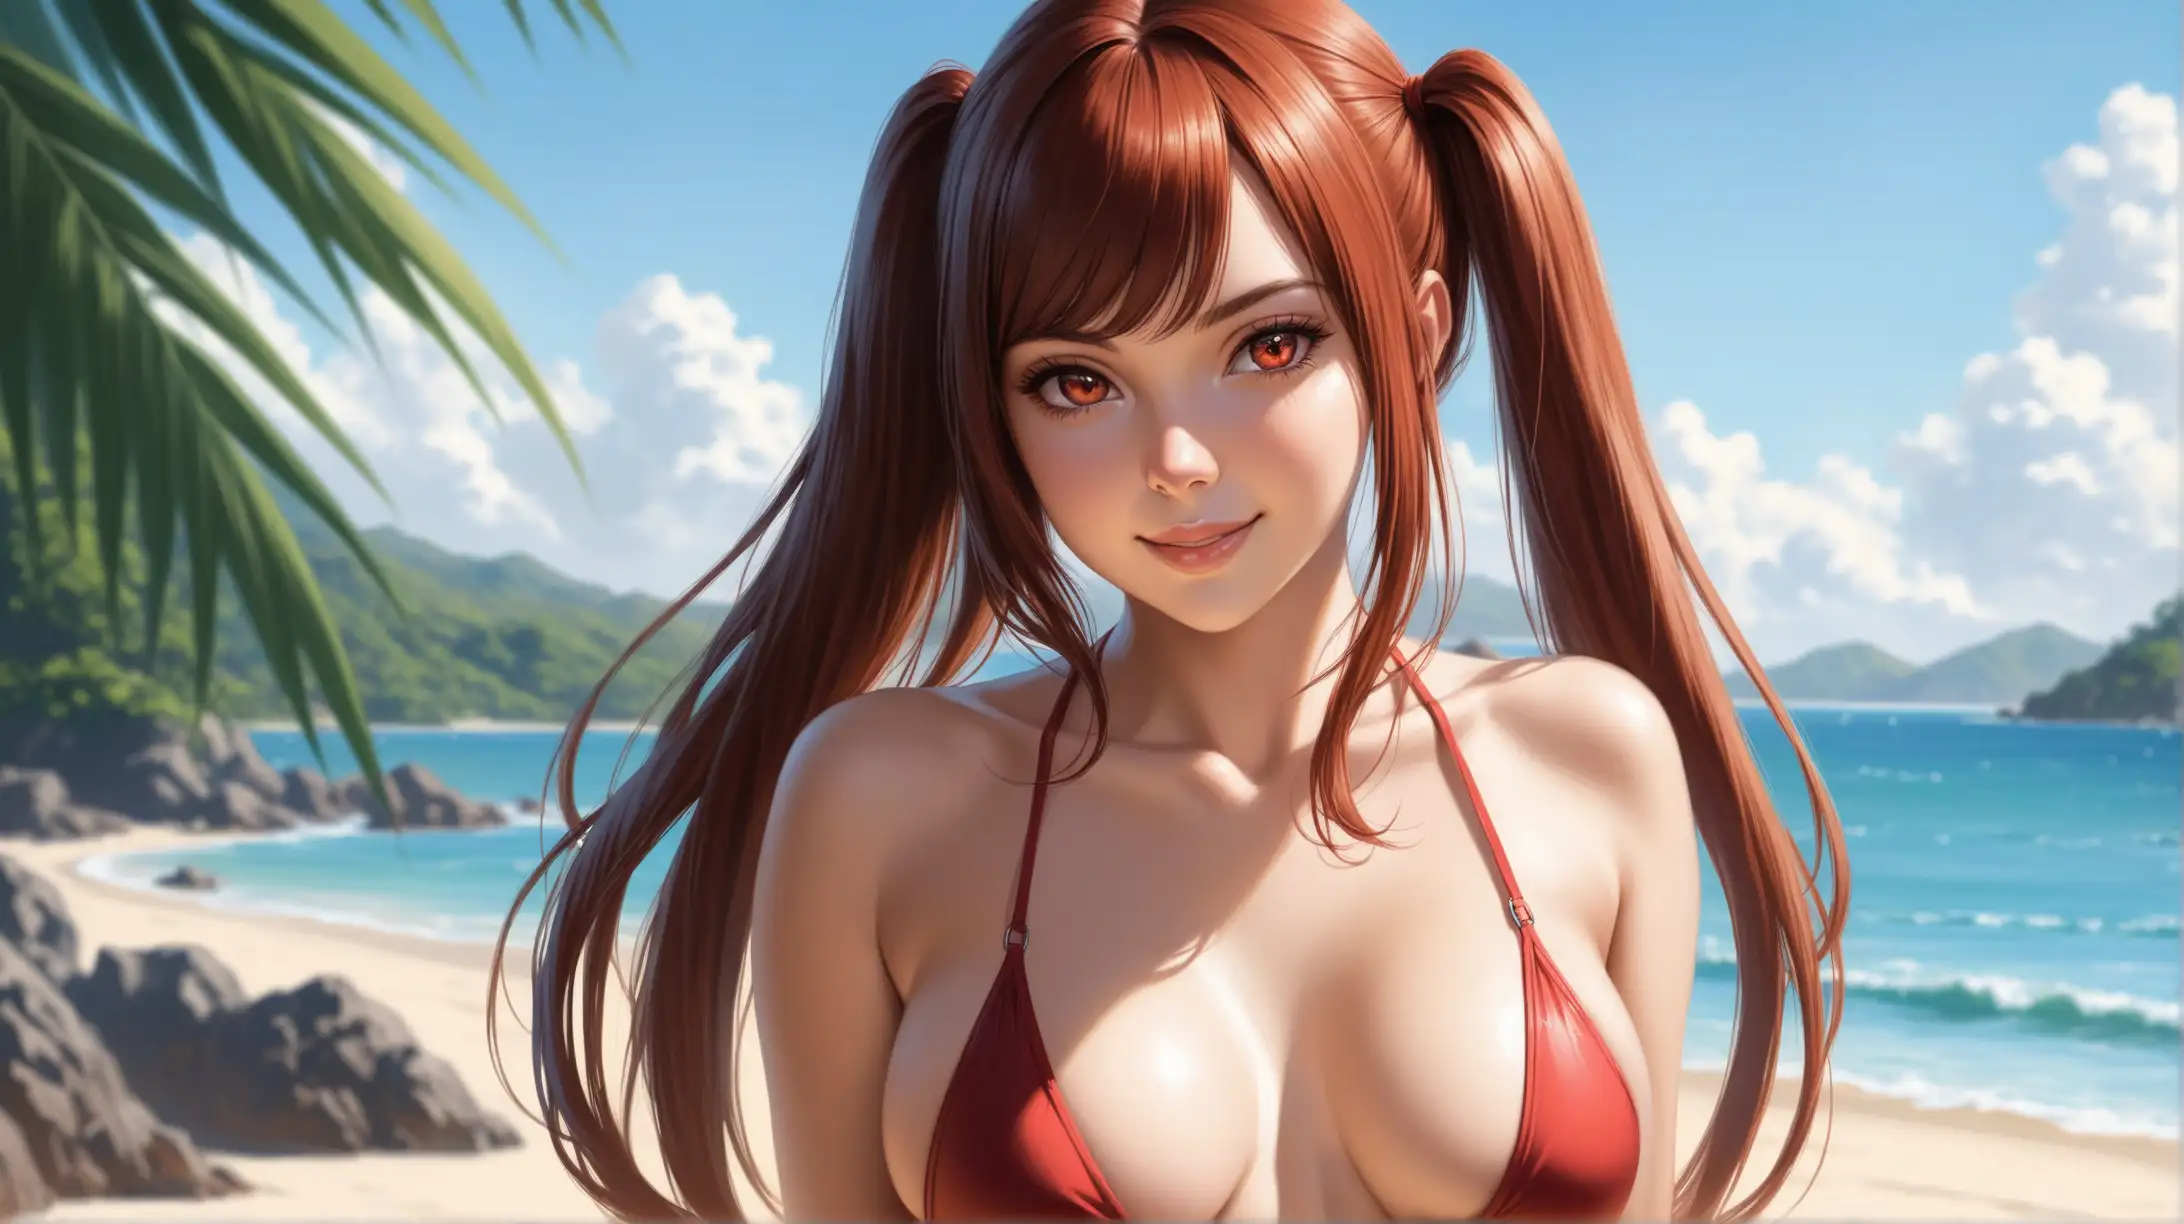 Draw a woman, very long reddish-brown hair, two parted twin tails, side locks, side-swept bangs, scarlet eyes, perky body, high quality, realistic, accurate, detailed, long shot, natural lighting, outdoors, seductive pose, swimsuit, smiling at the viewer